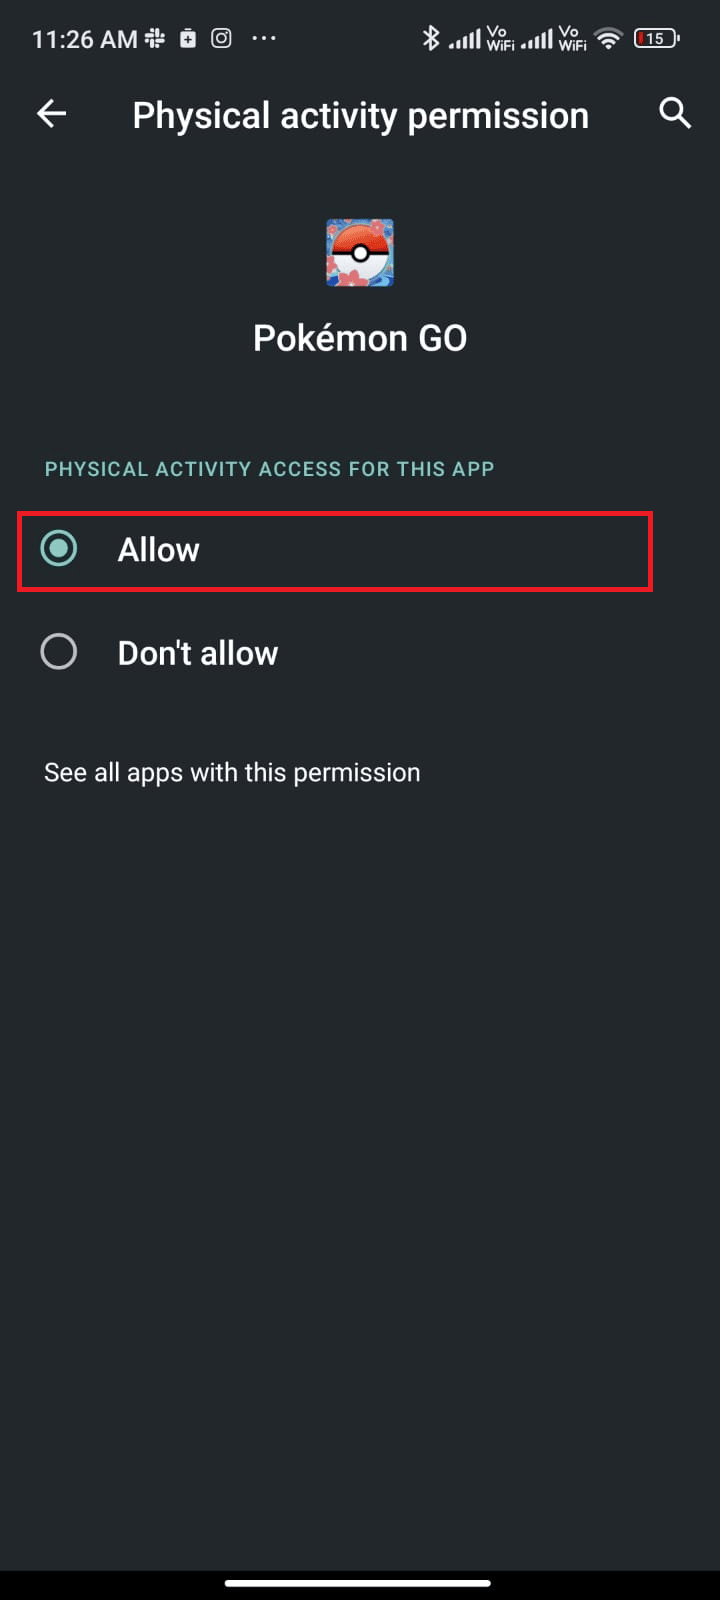 Enable the permissions for respective settings by tapping Allow